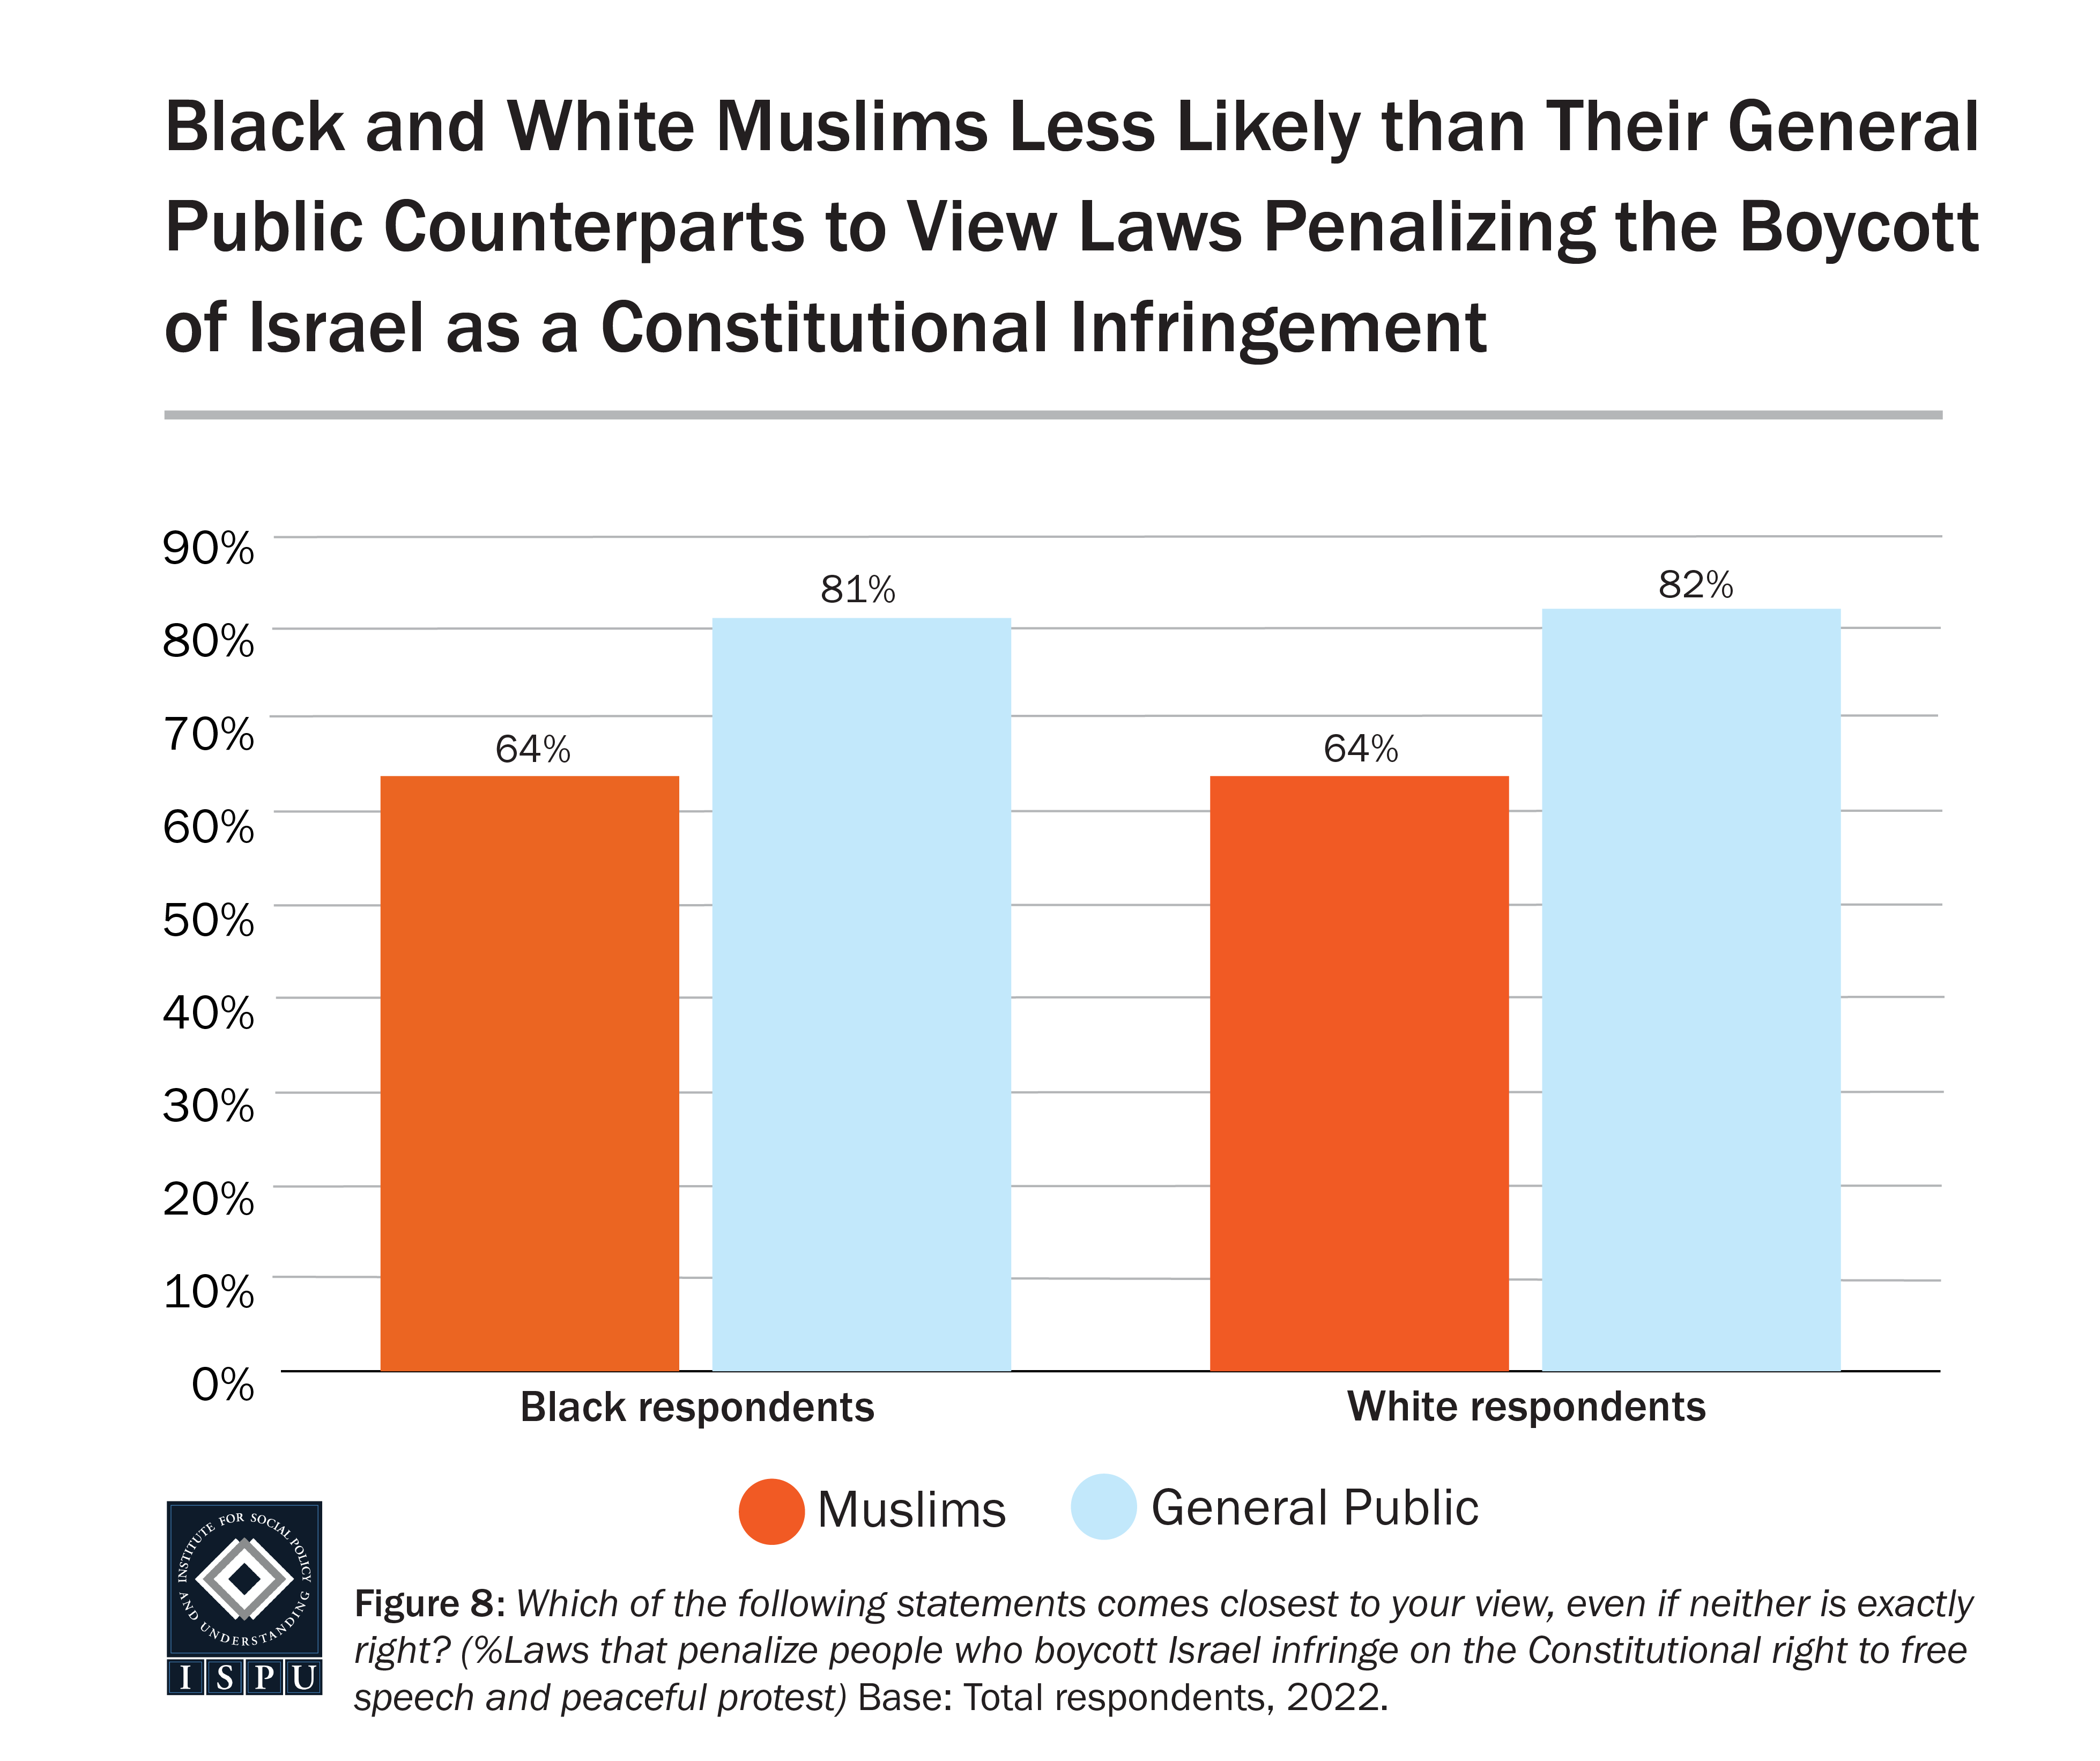 Graph displaying: A bar graph showing that Black and white Muslims are less likely than their racial counterparts in the general population to view anti-BDS laws a violation of Constitutional rights.